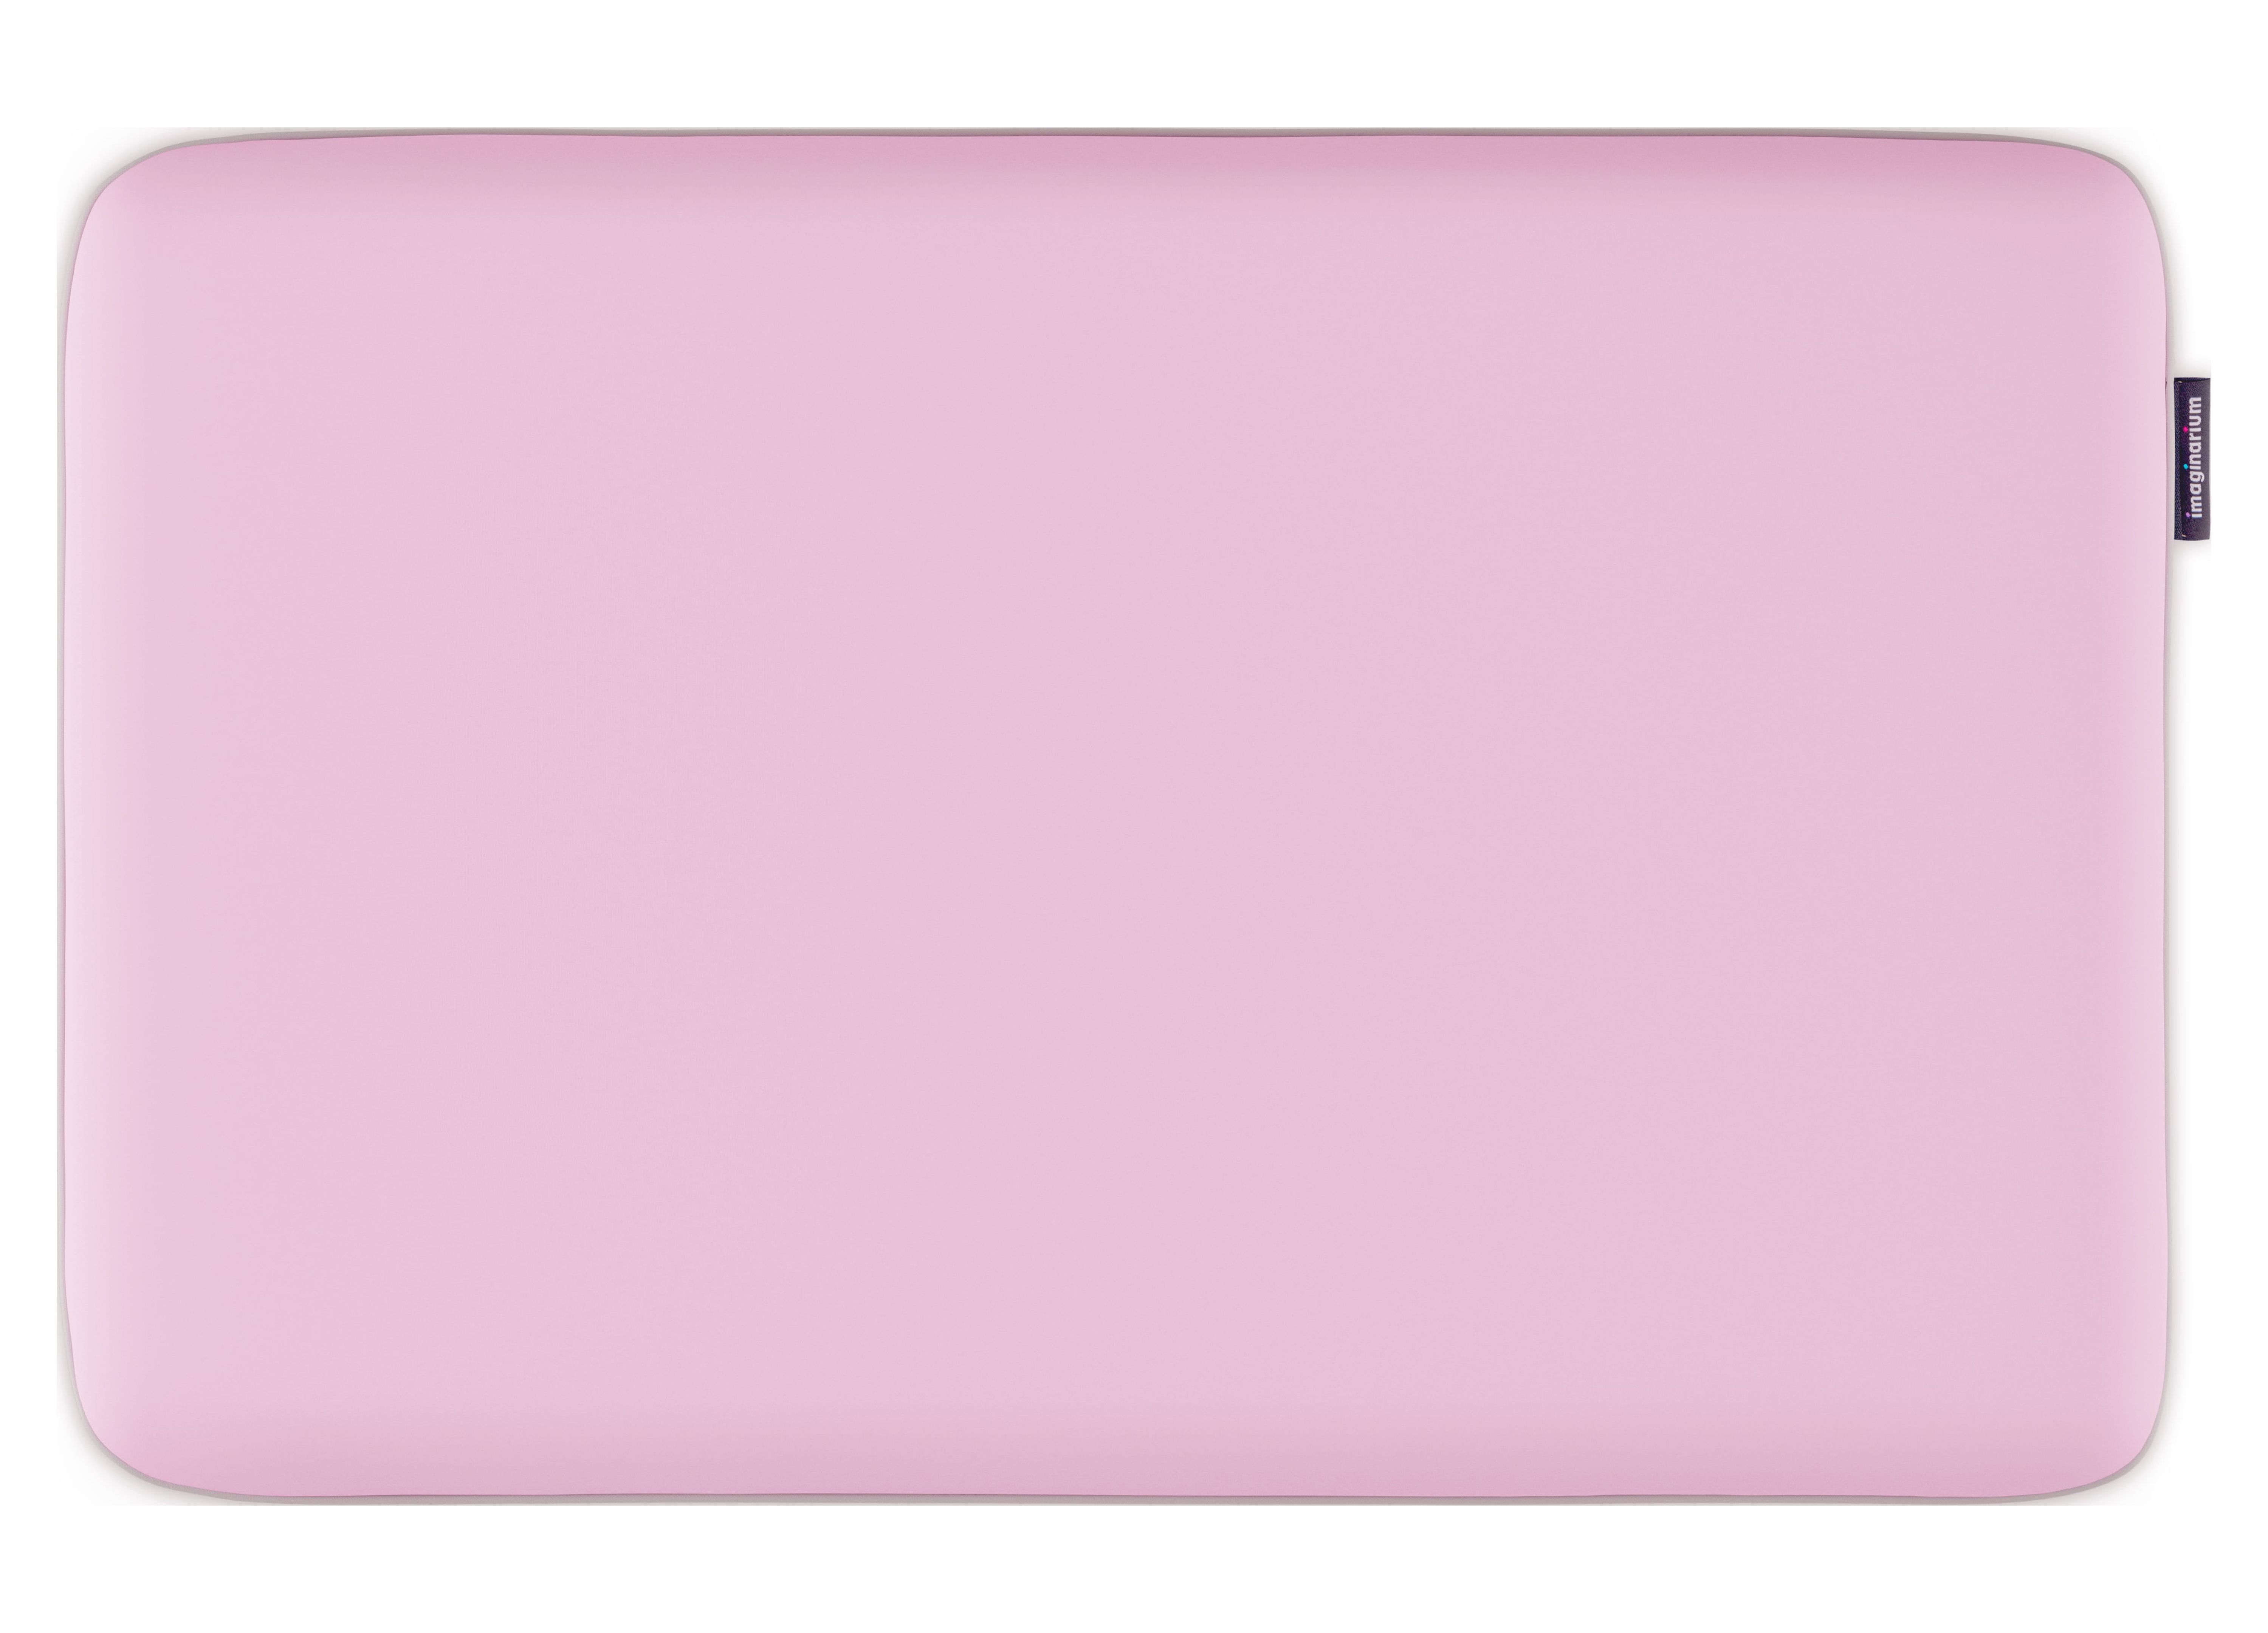 Memory Foam Fun Pillow With Cool-to-the-Touch Cover, Standard/Queen, Pale Pink, 1 Pack - image 5 of 7